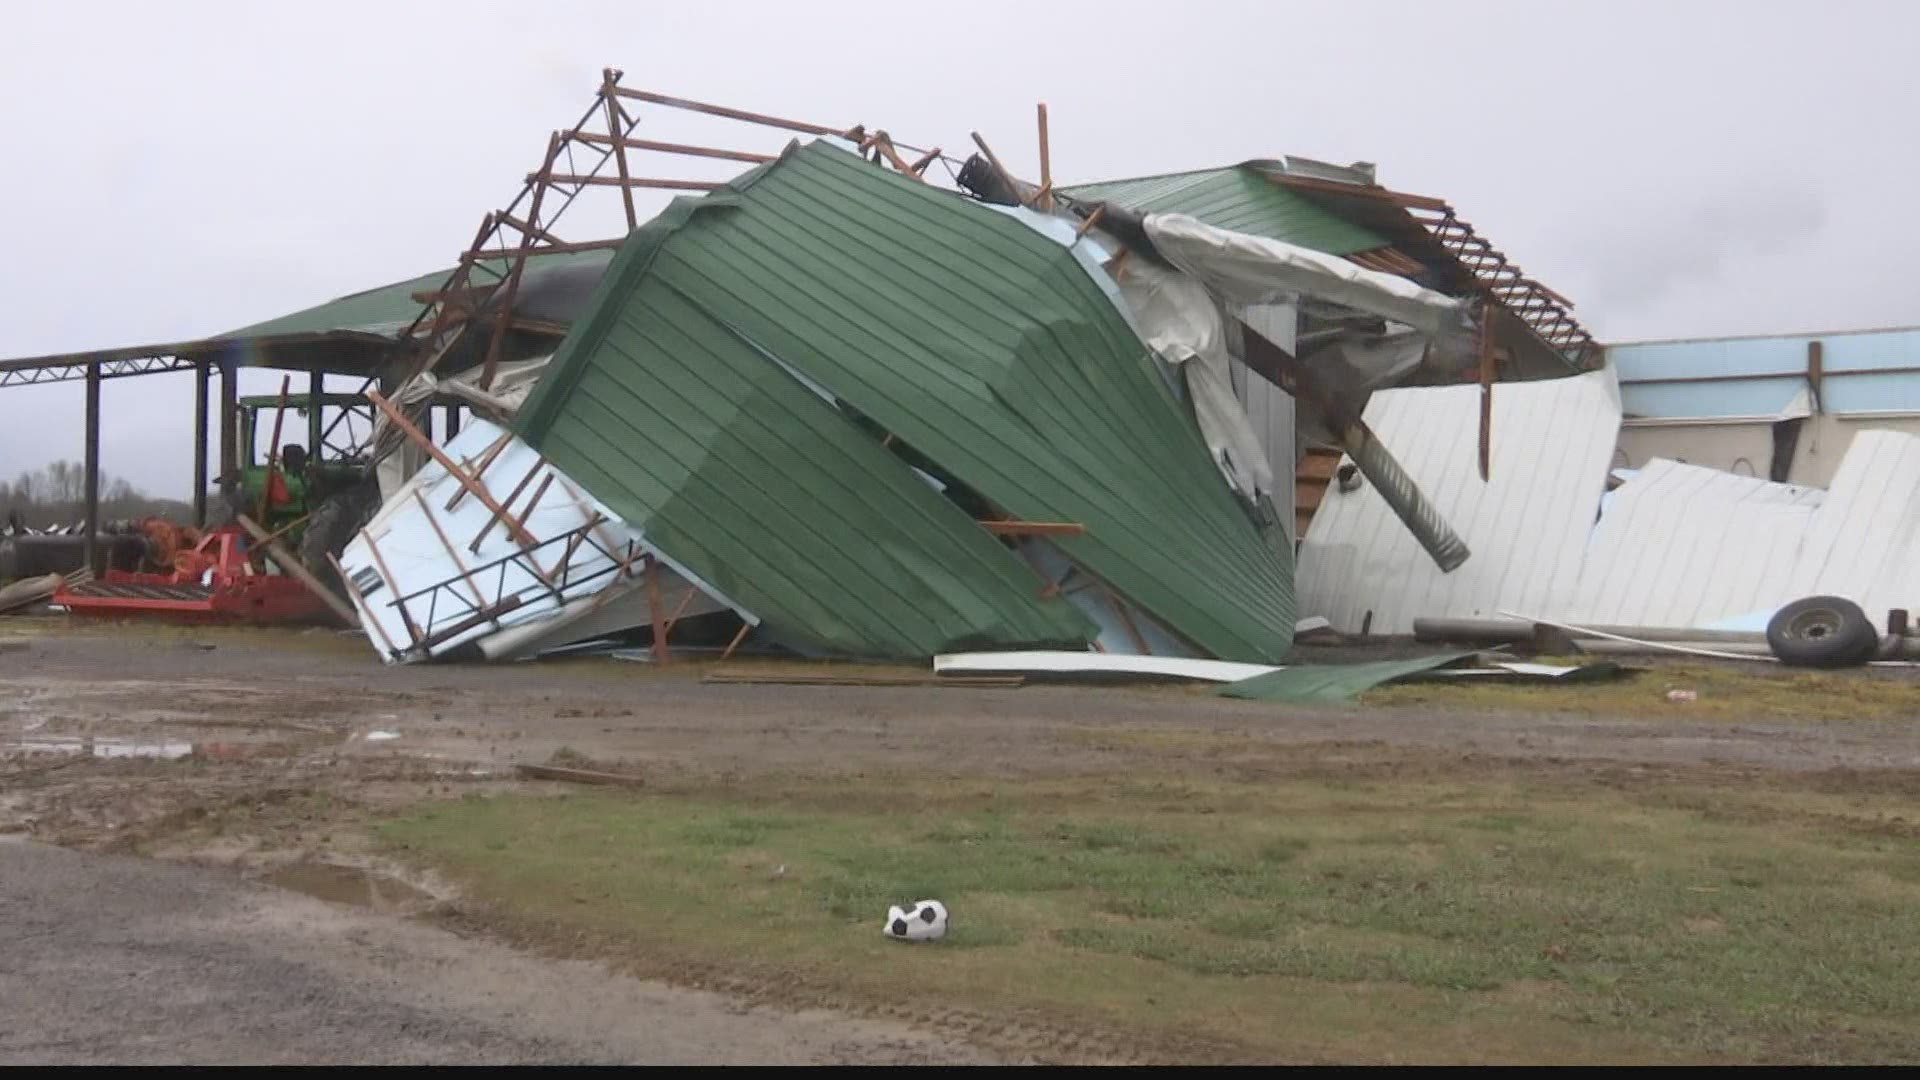 Severe weather left one sod farm in shambles. So far, The National Weather Service confirmed two EF-1 tornados in Cullman County.